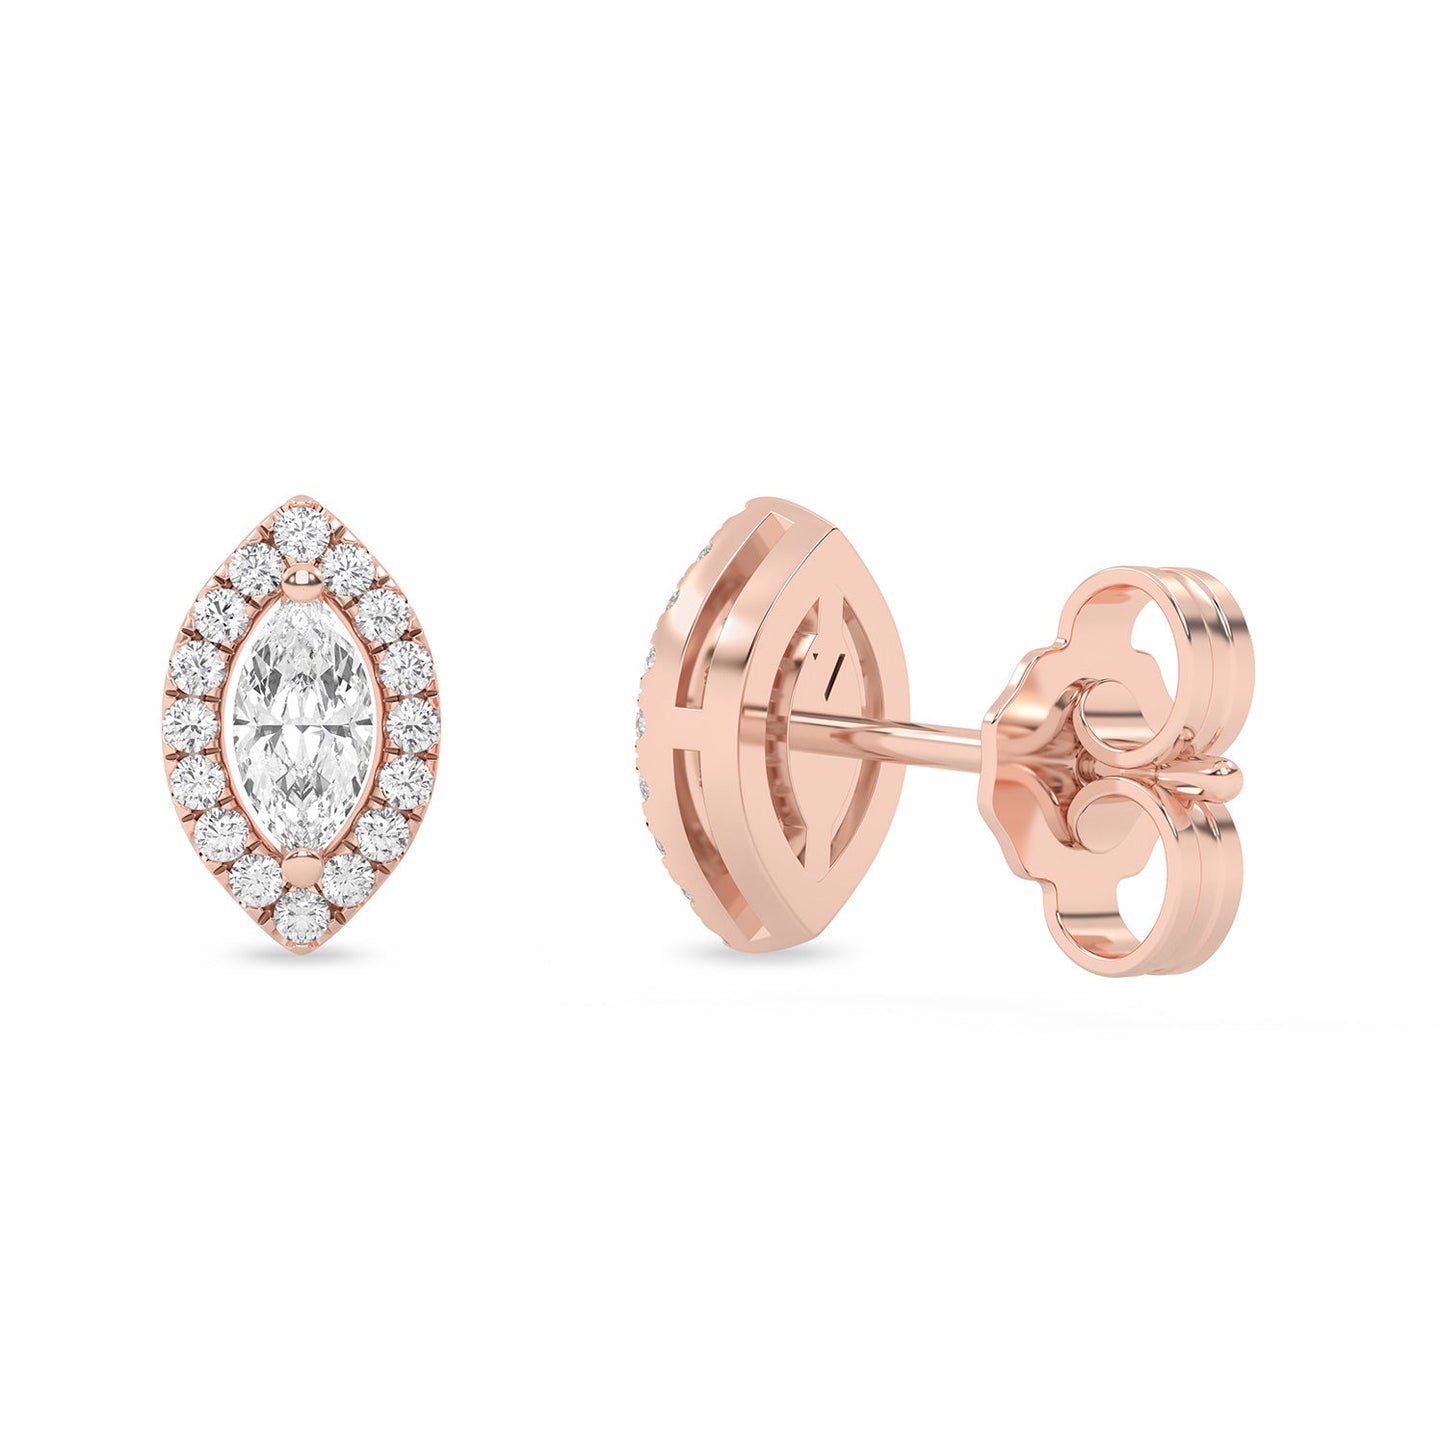 Marquise Halo Studs_Product Angle_1/3 Ct. -  3